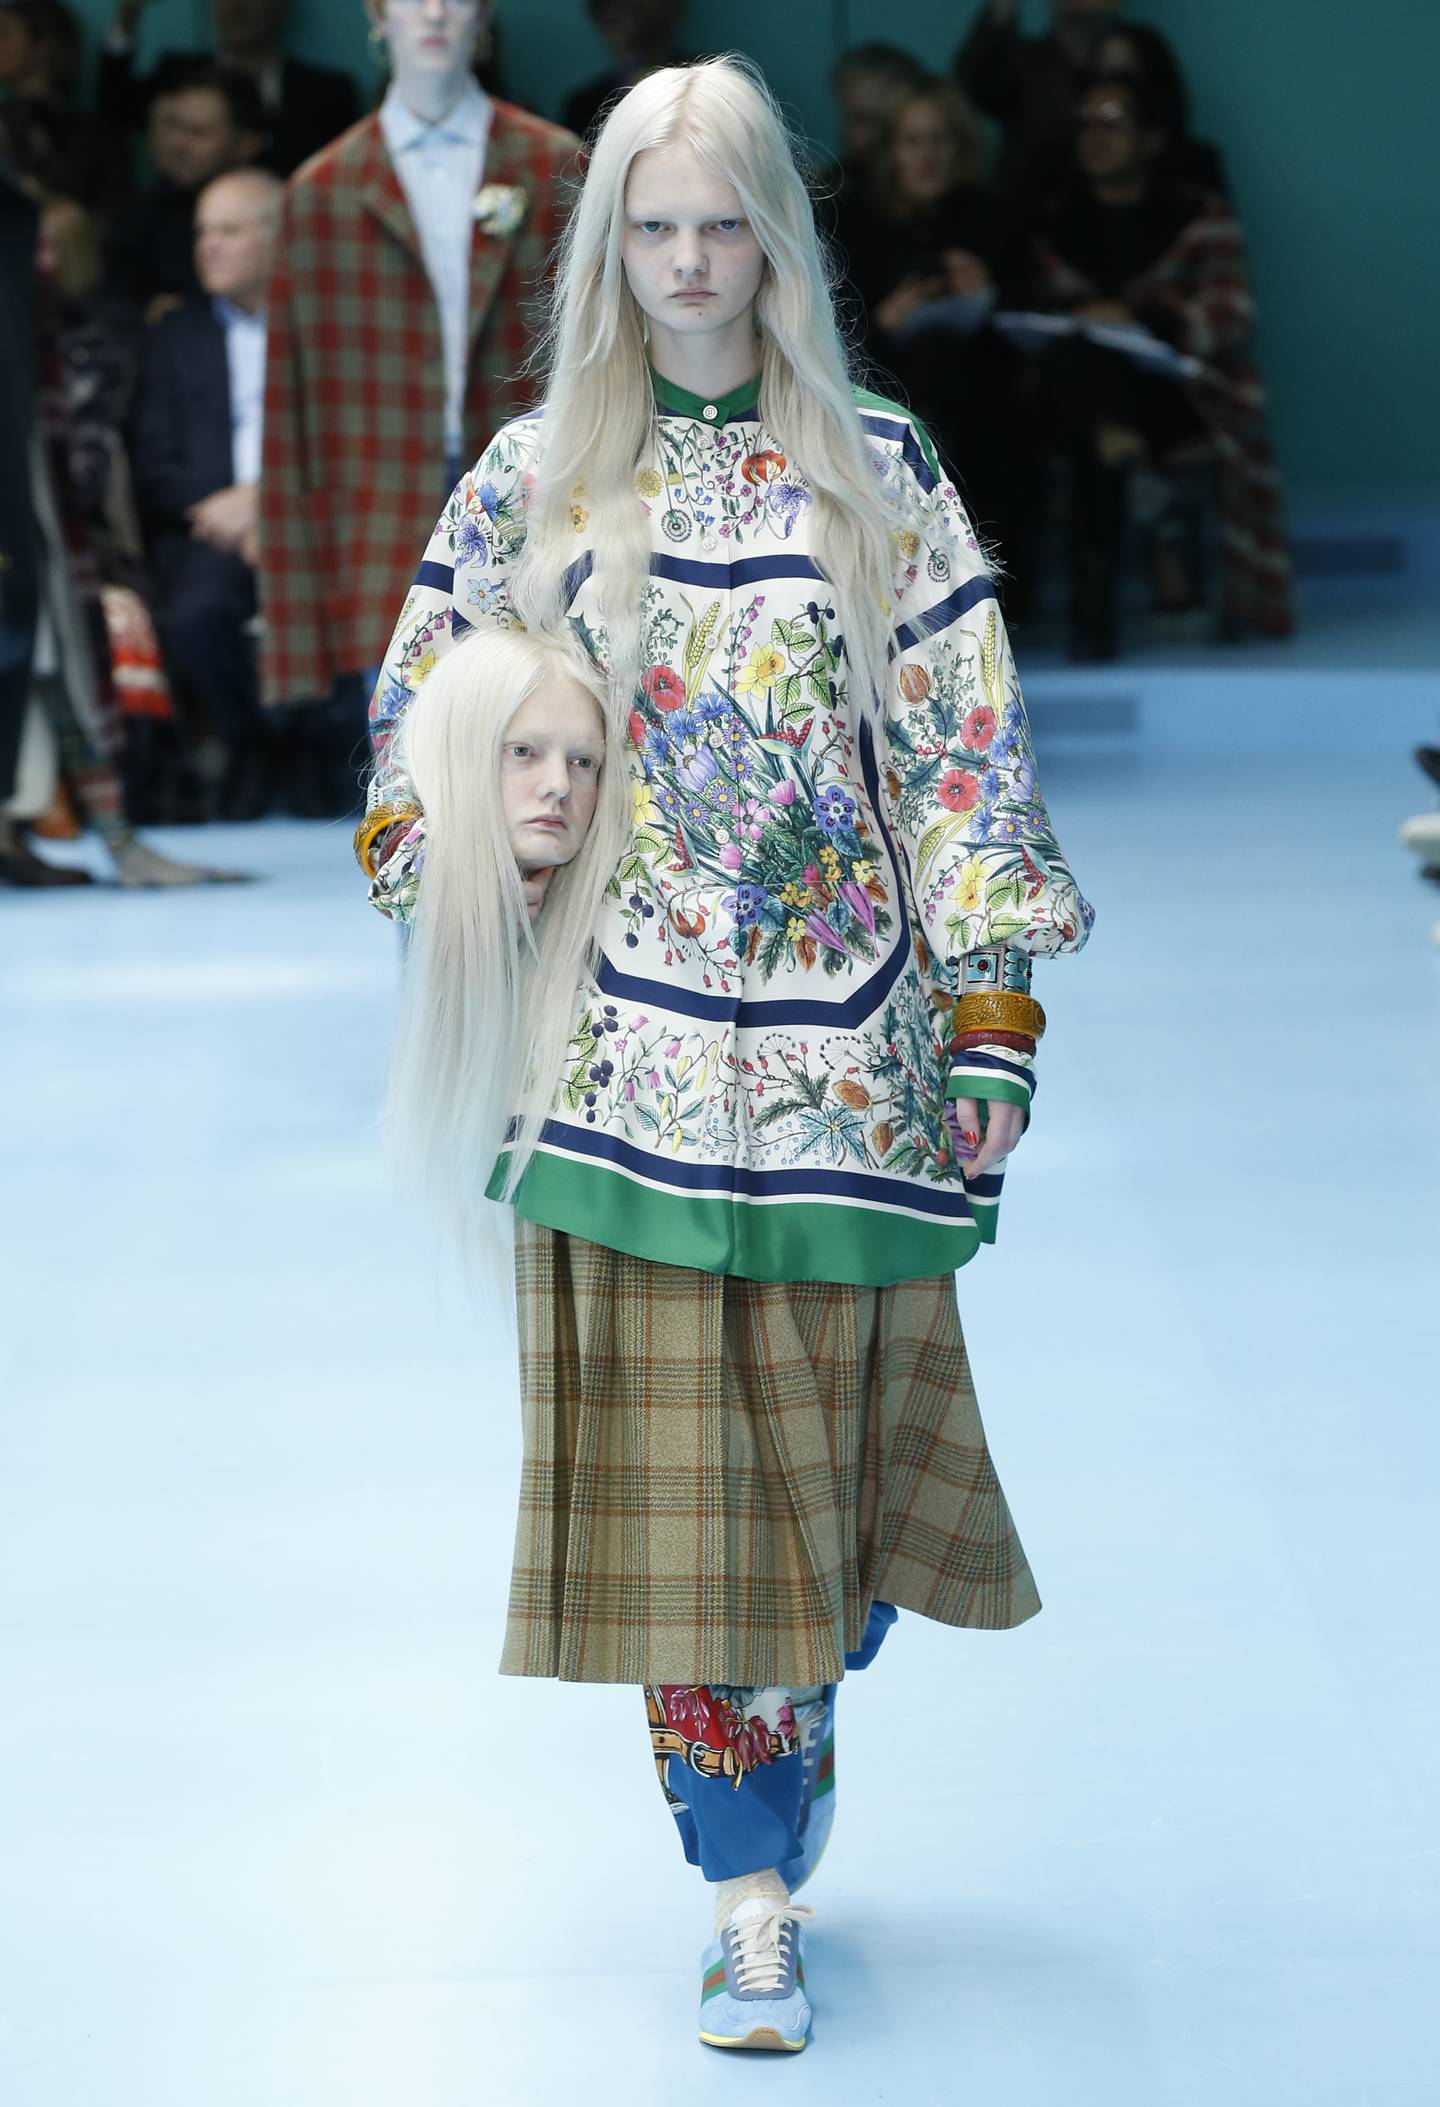 Models carry their own heads at the Gucci autumn/winter 2018 women's show at Milan Fashion Week. Photo: Gucci